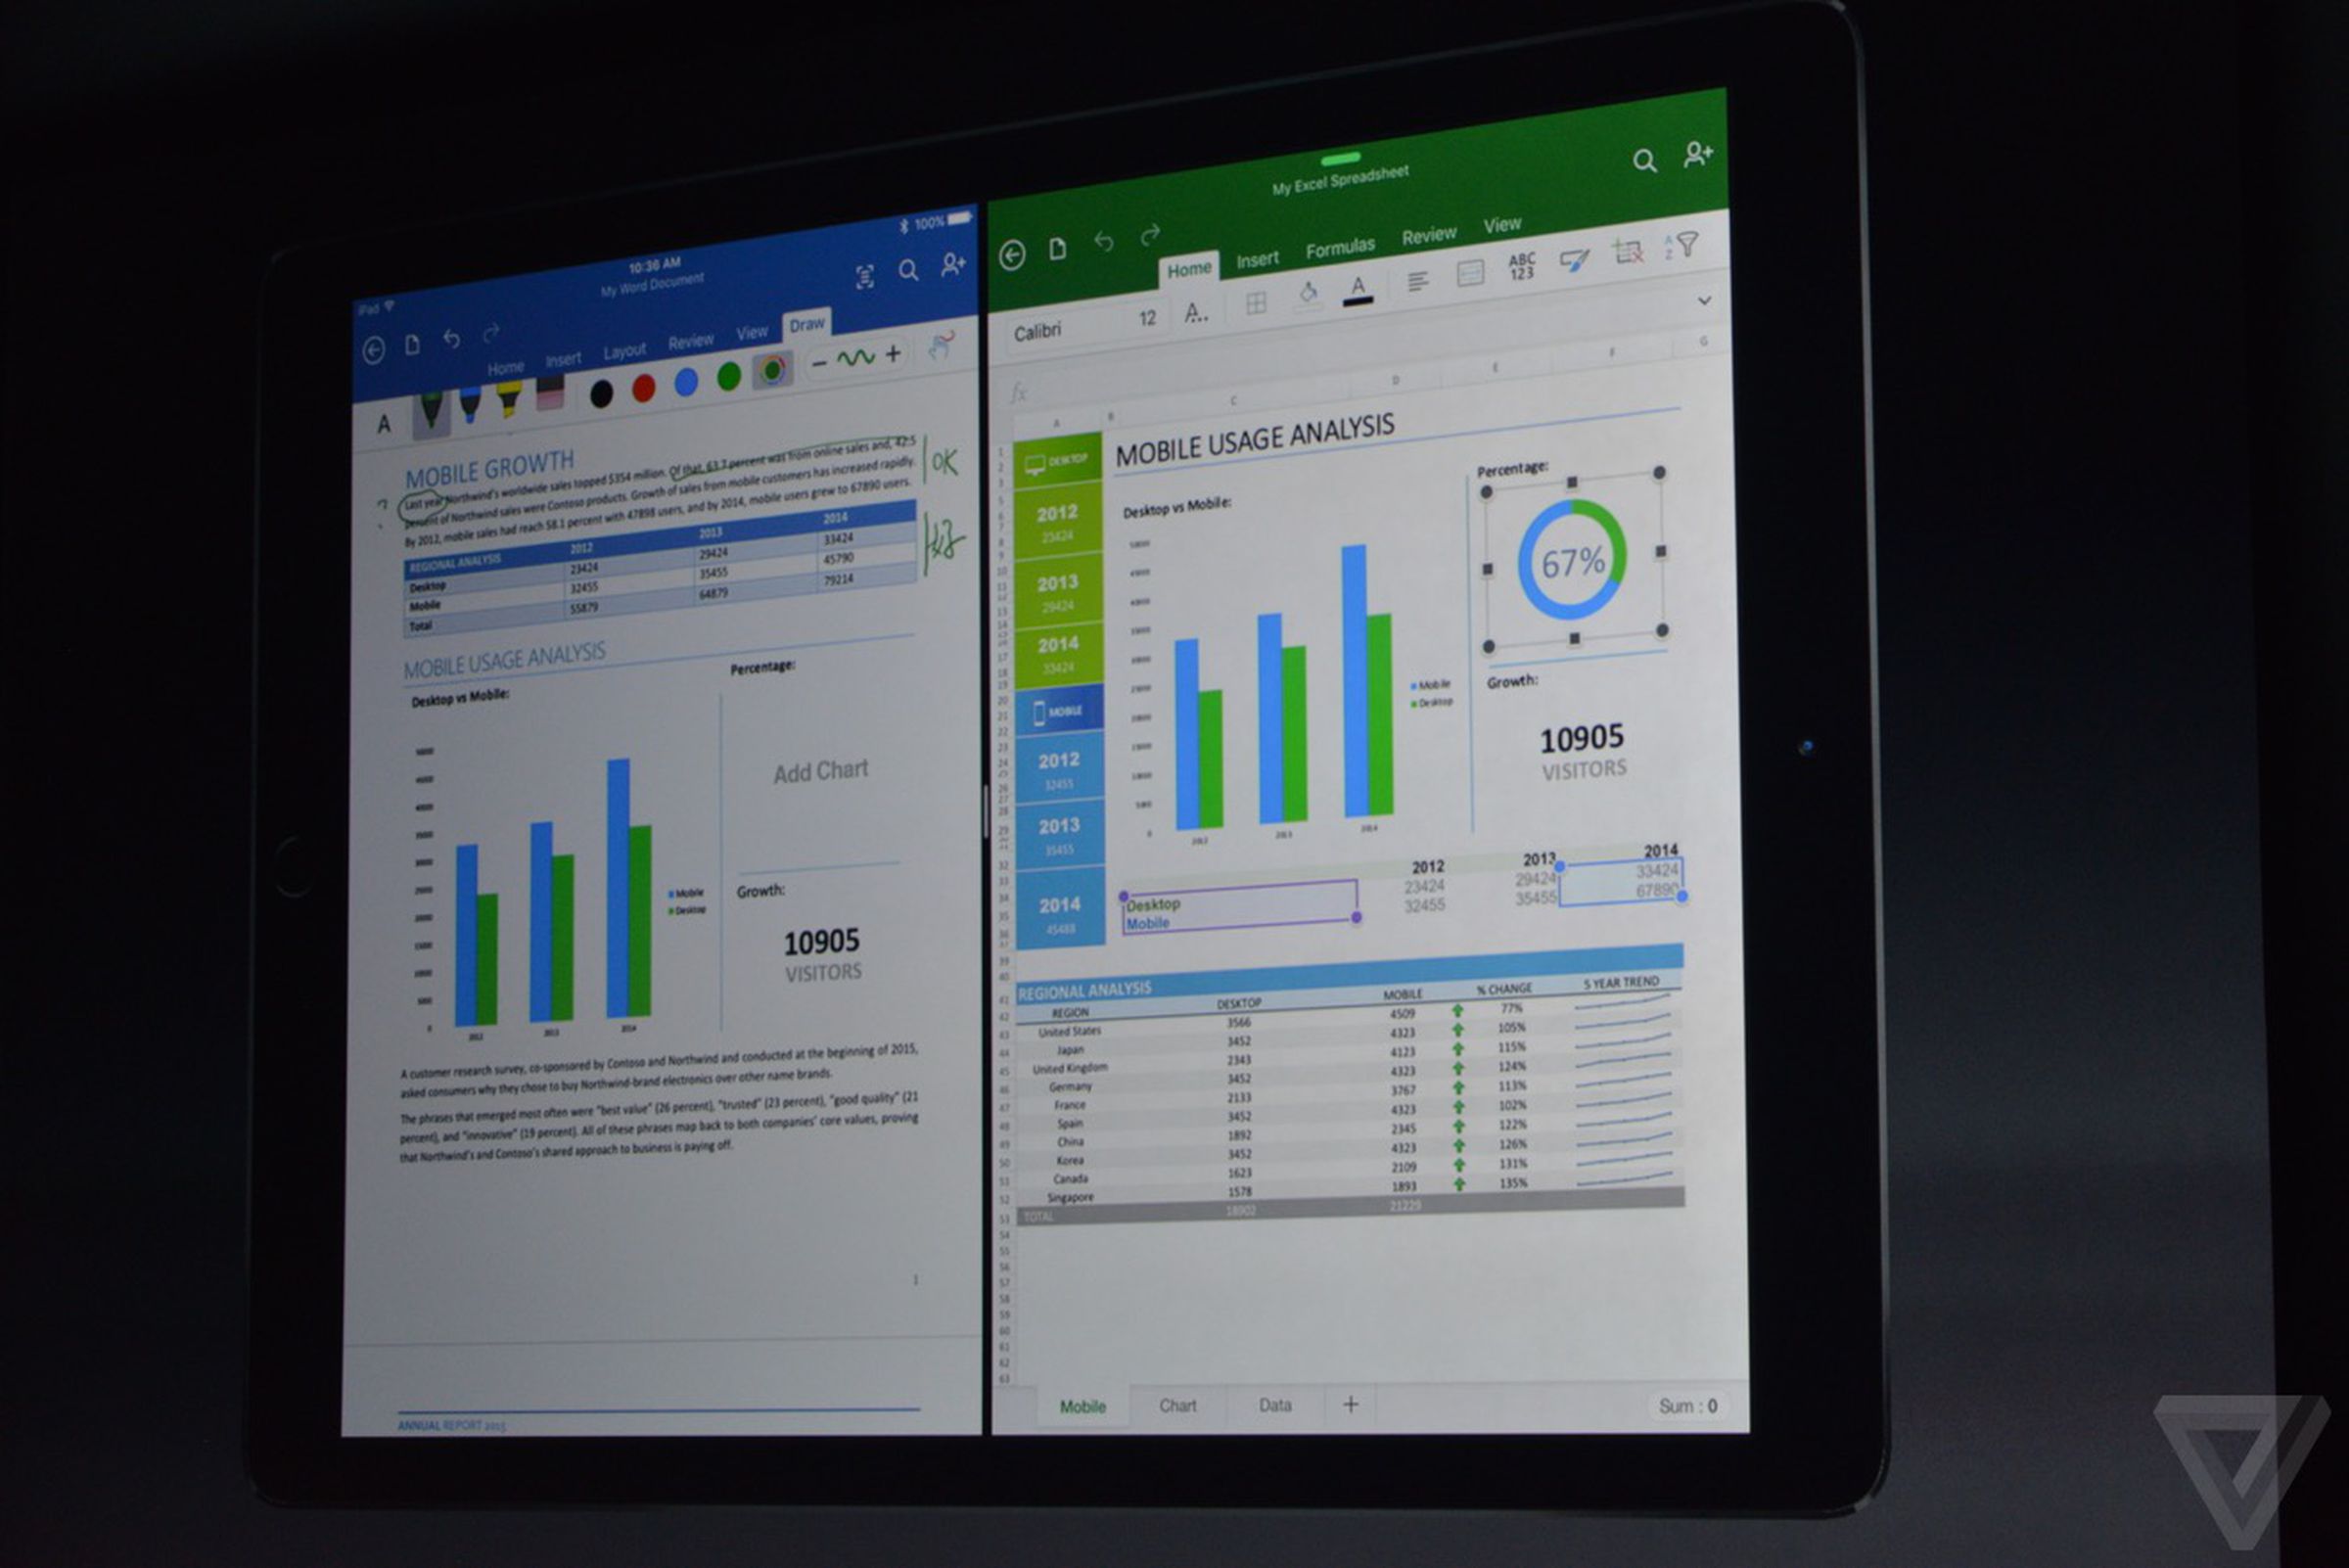 Office for iPad Pro